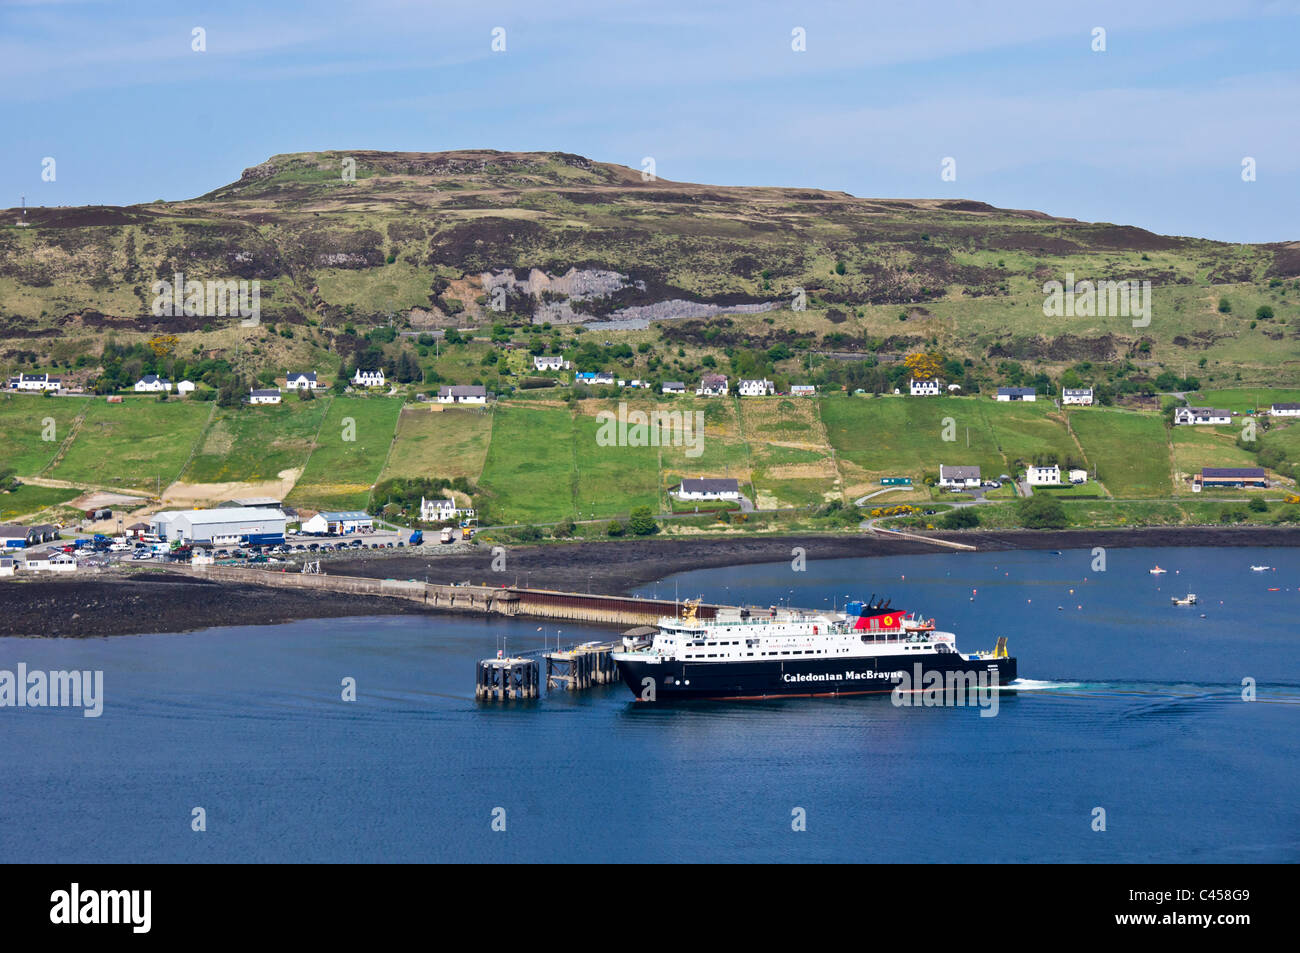 Caledonian MacBrayne car ferry Hebrides is approaching the pier in Uig on the Isle of Skye Scotland Stock Photo